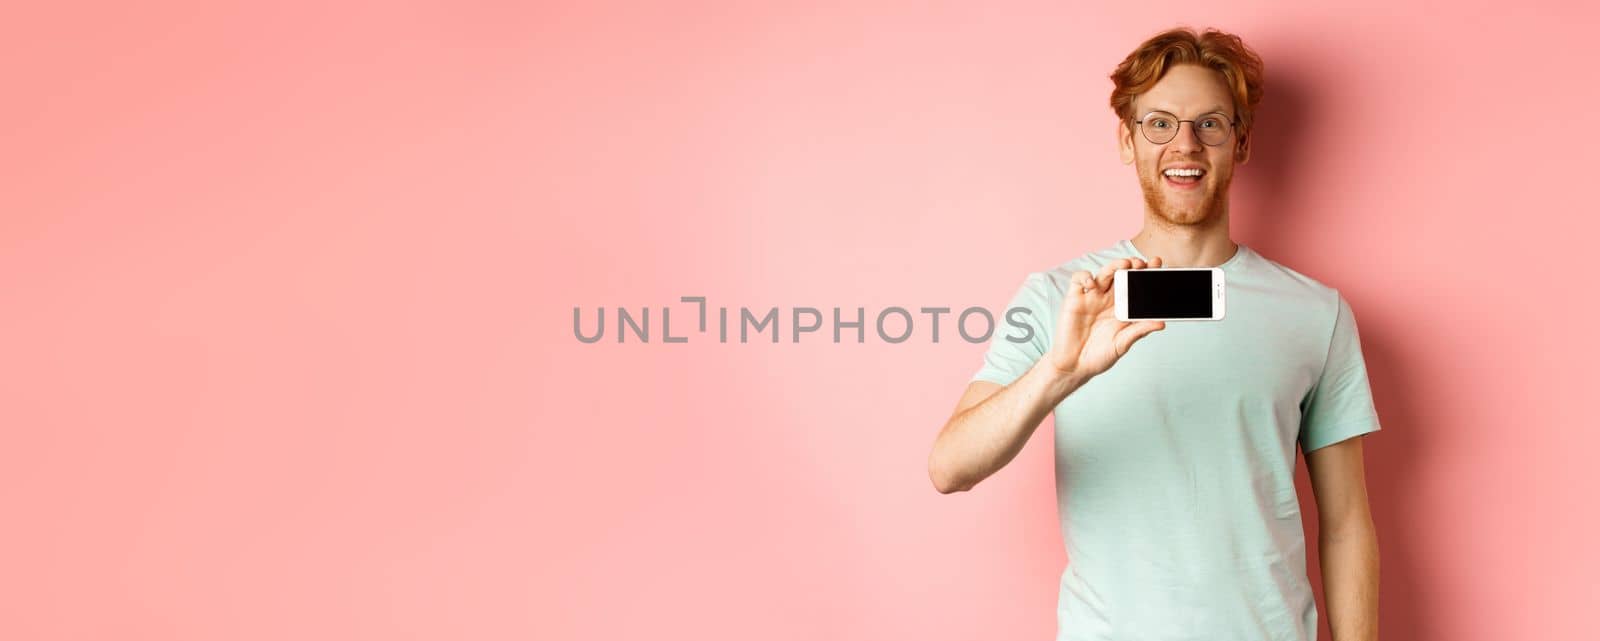 Happy young man with red hair showing smartphone screen, holding phone horizontally and smiling amazed, standing over pink background.